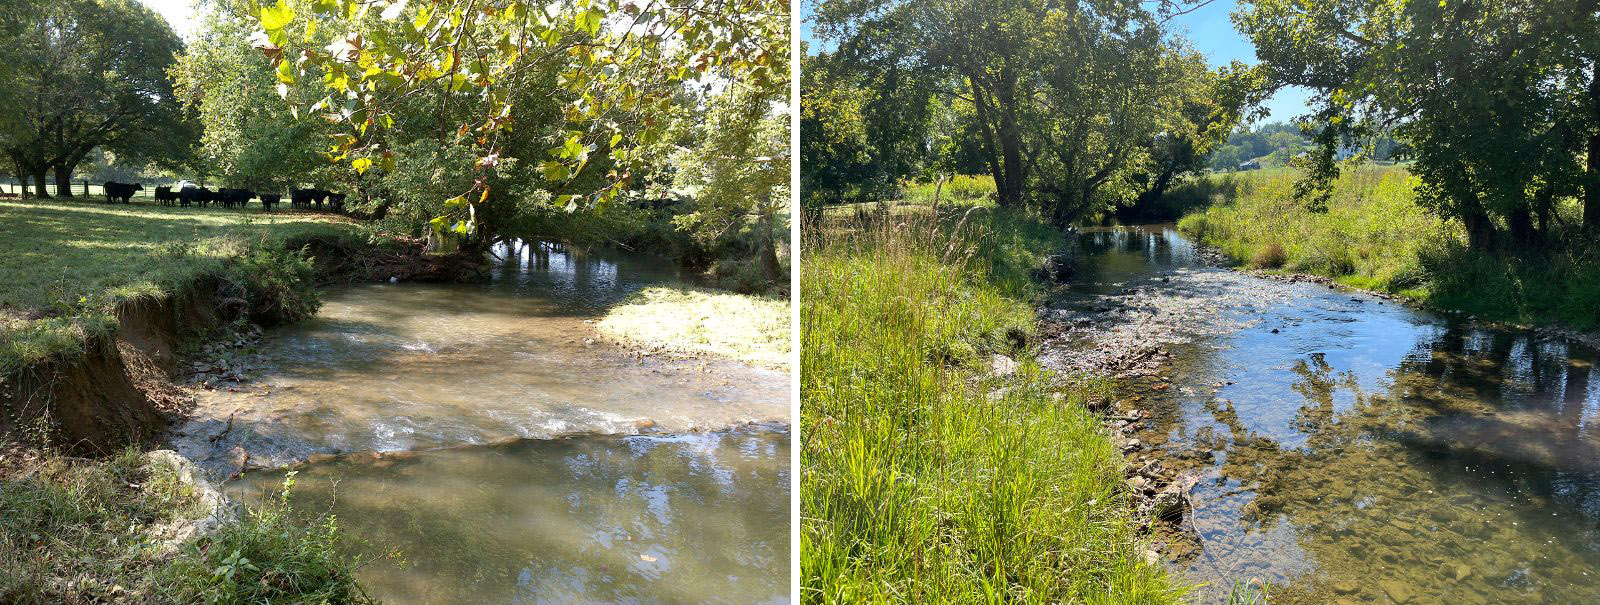 Two photos side by side, one of a stream with extremely eroded banks, cattle grazing on the banks, and muddy water. The photo on the right is of the same location but with vegetation growing on the banks of the stream and clear water.